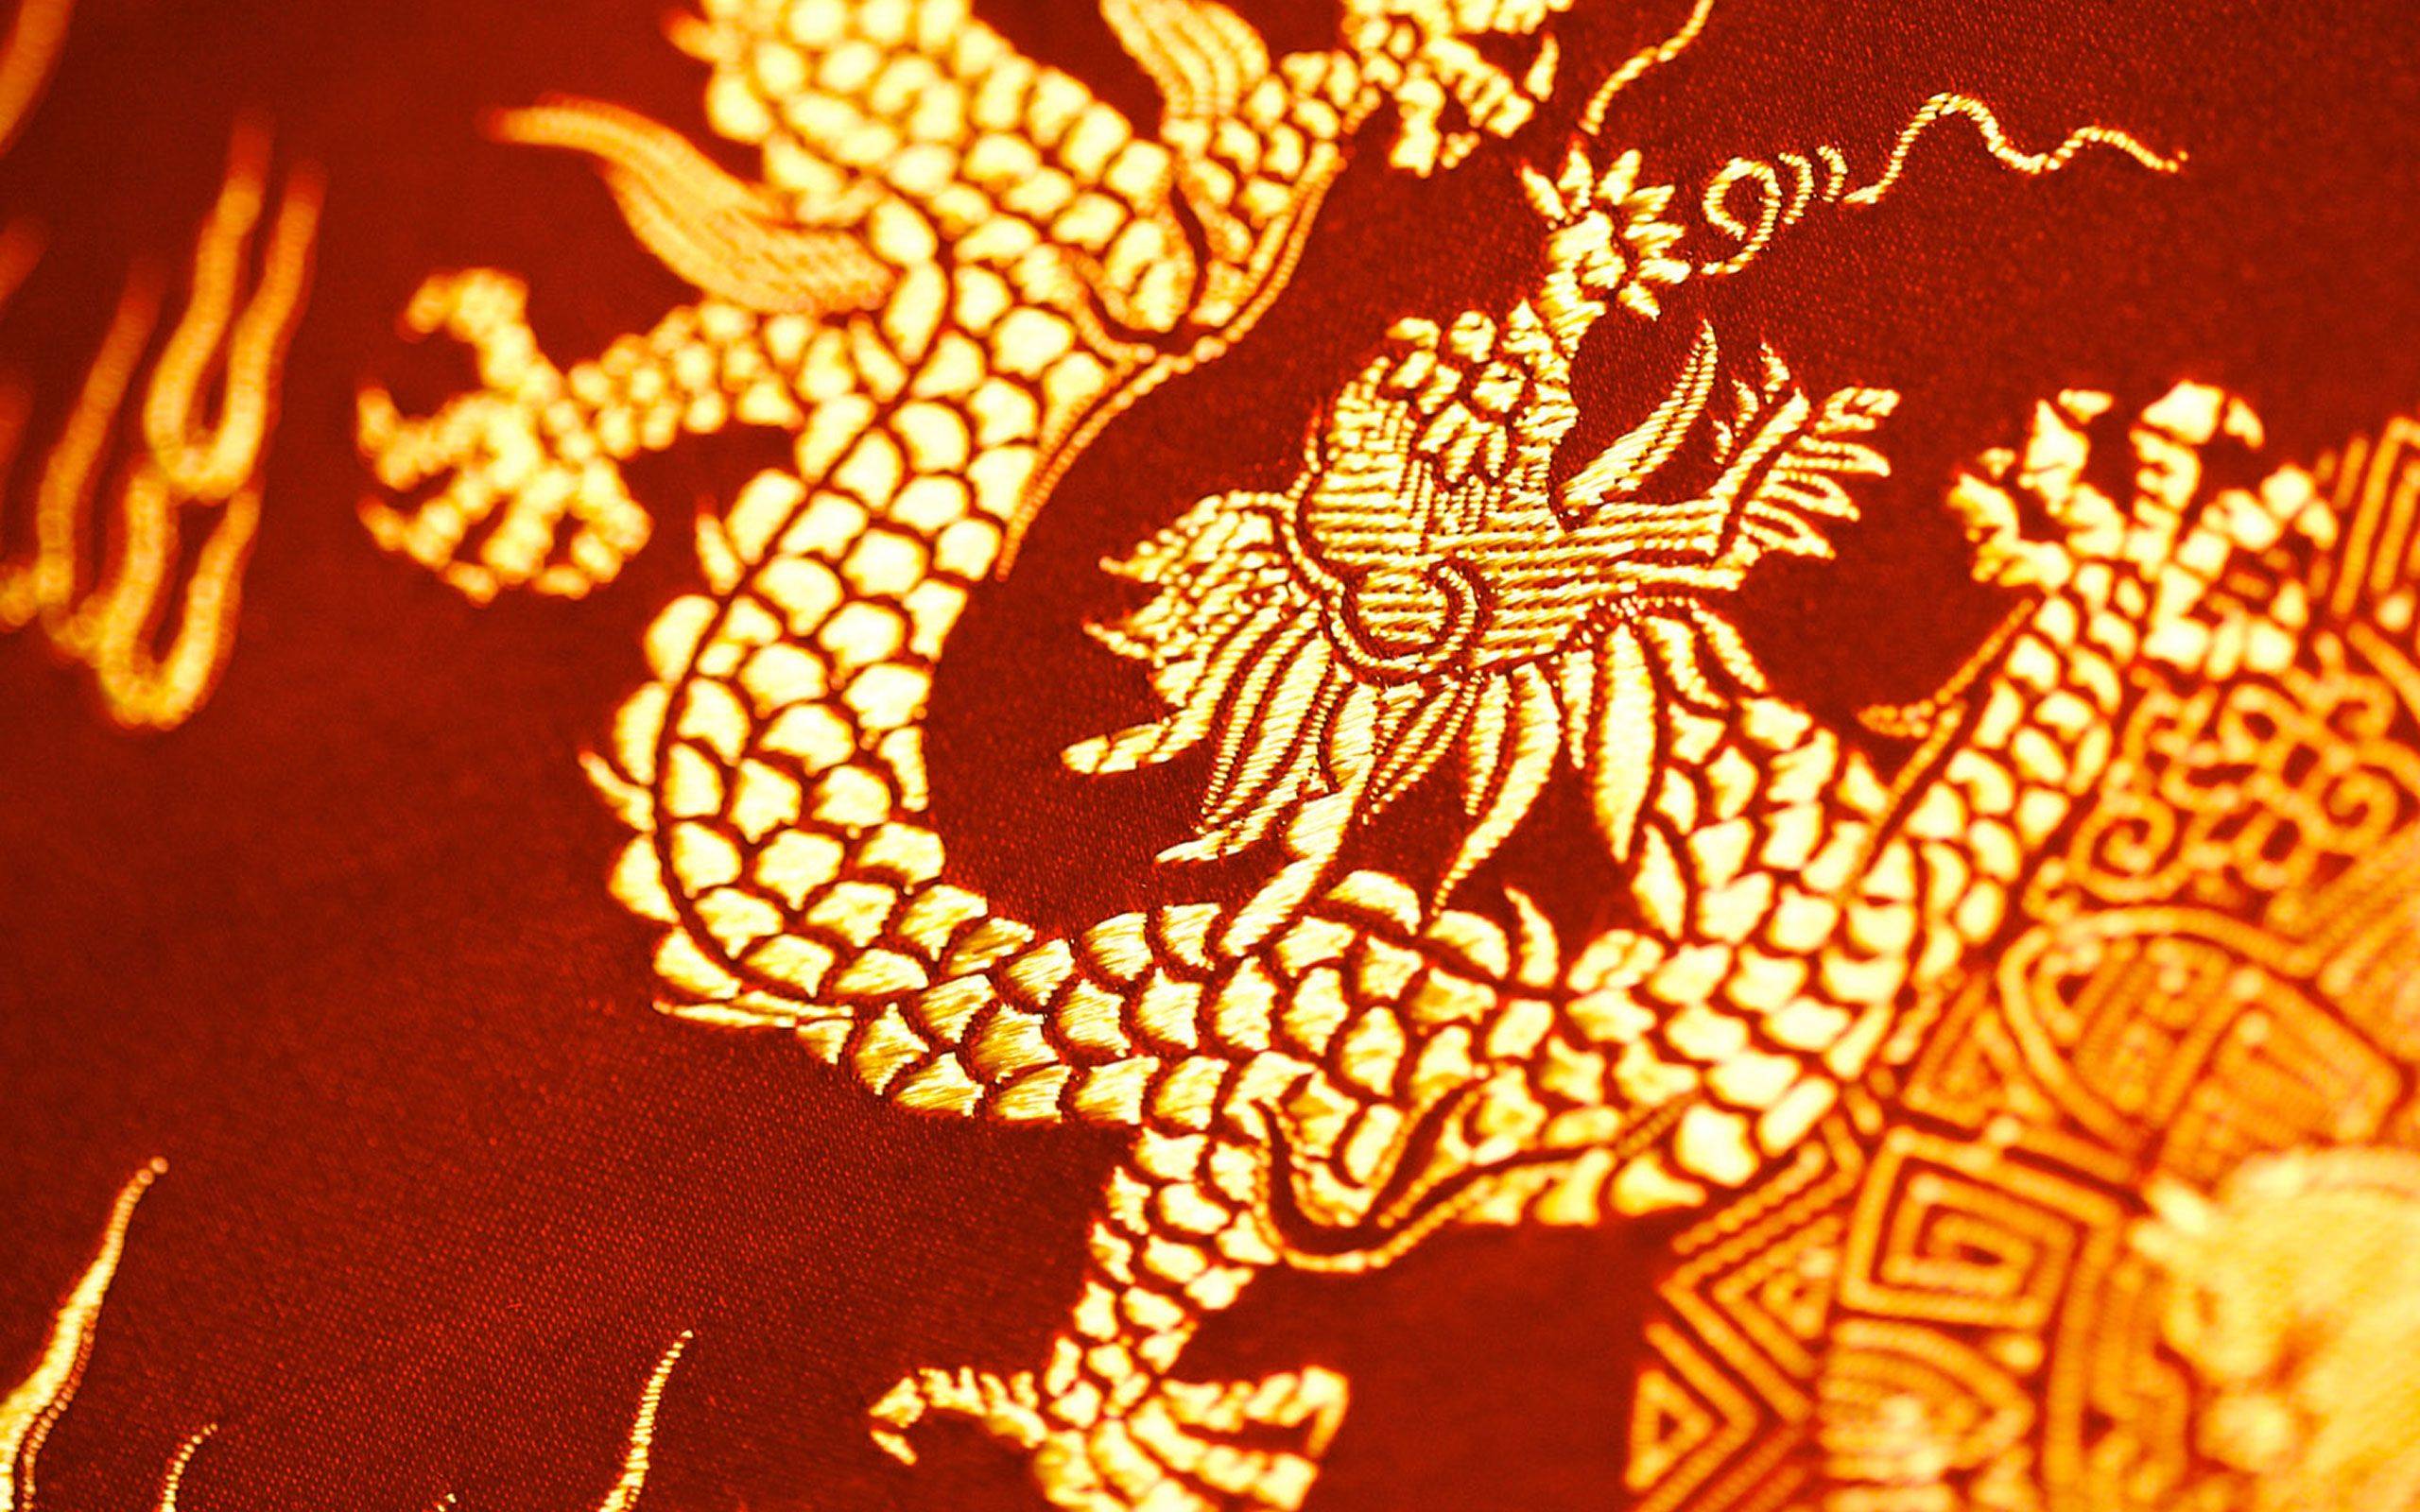 The exquisite embroidery of the Chinese Wind 6